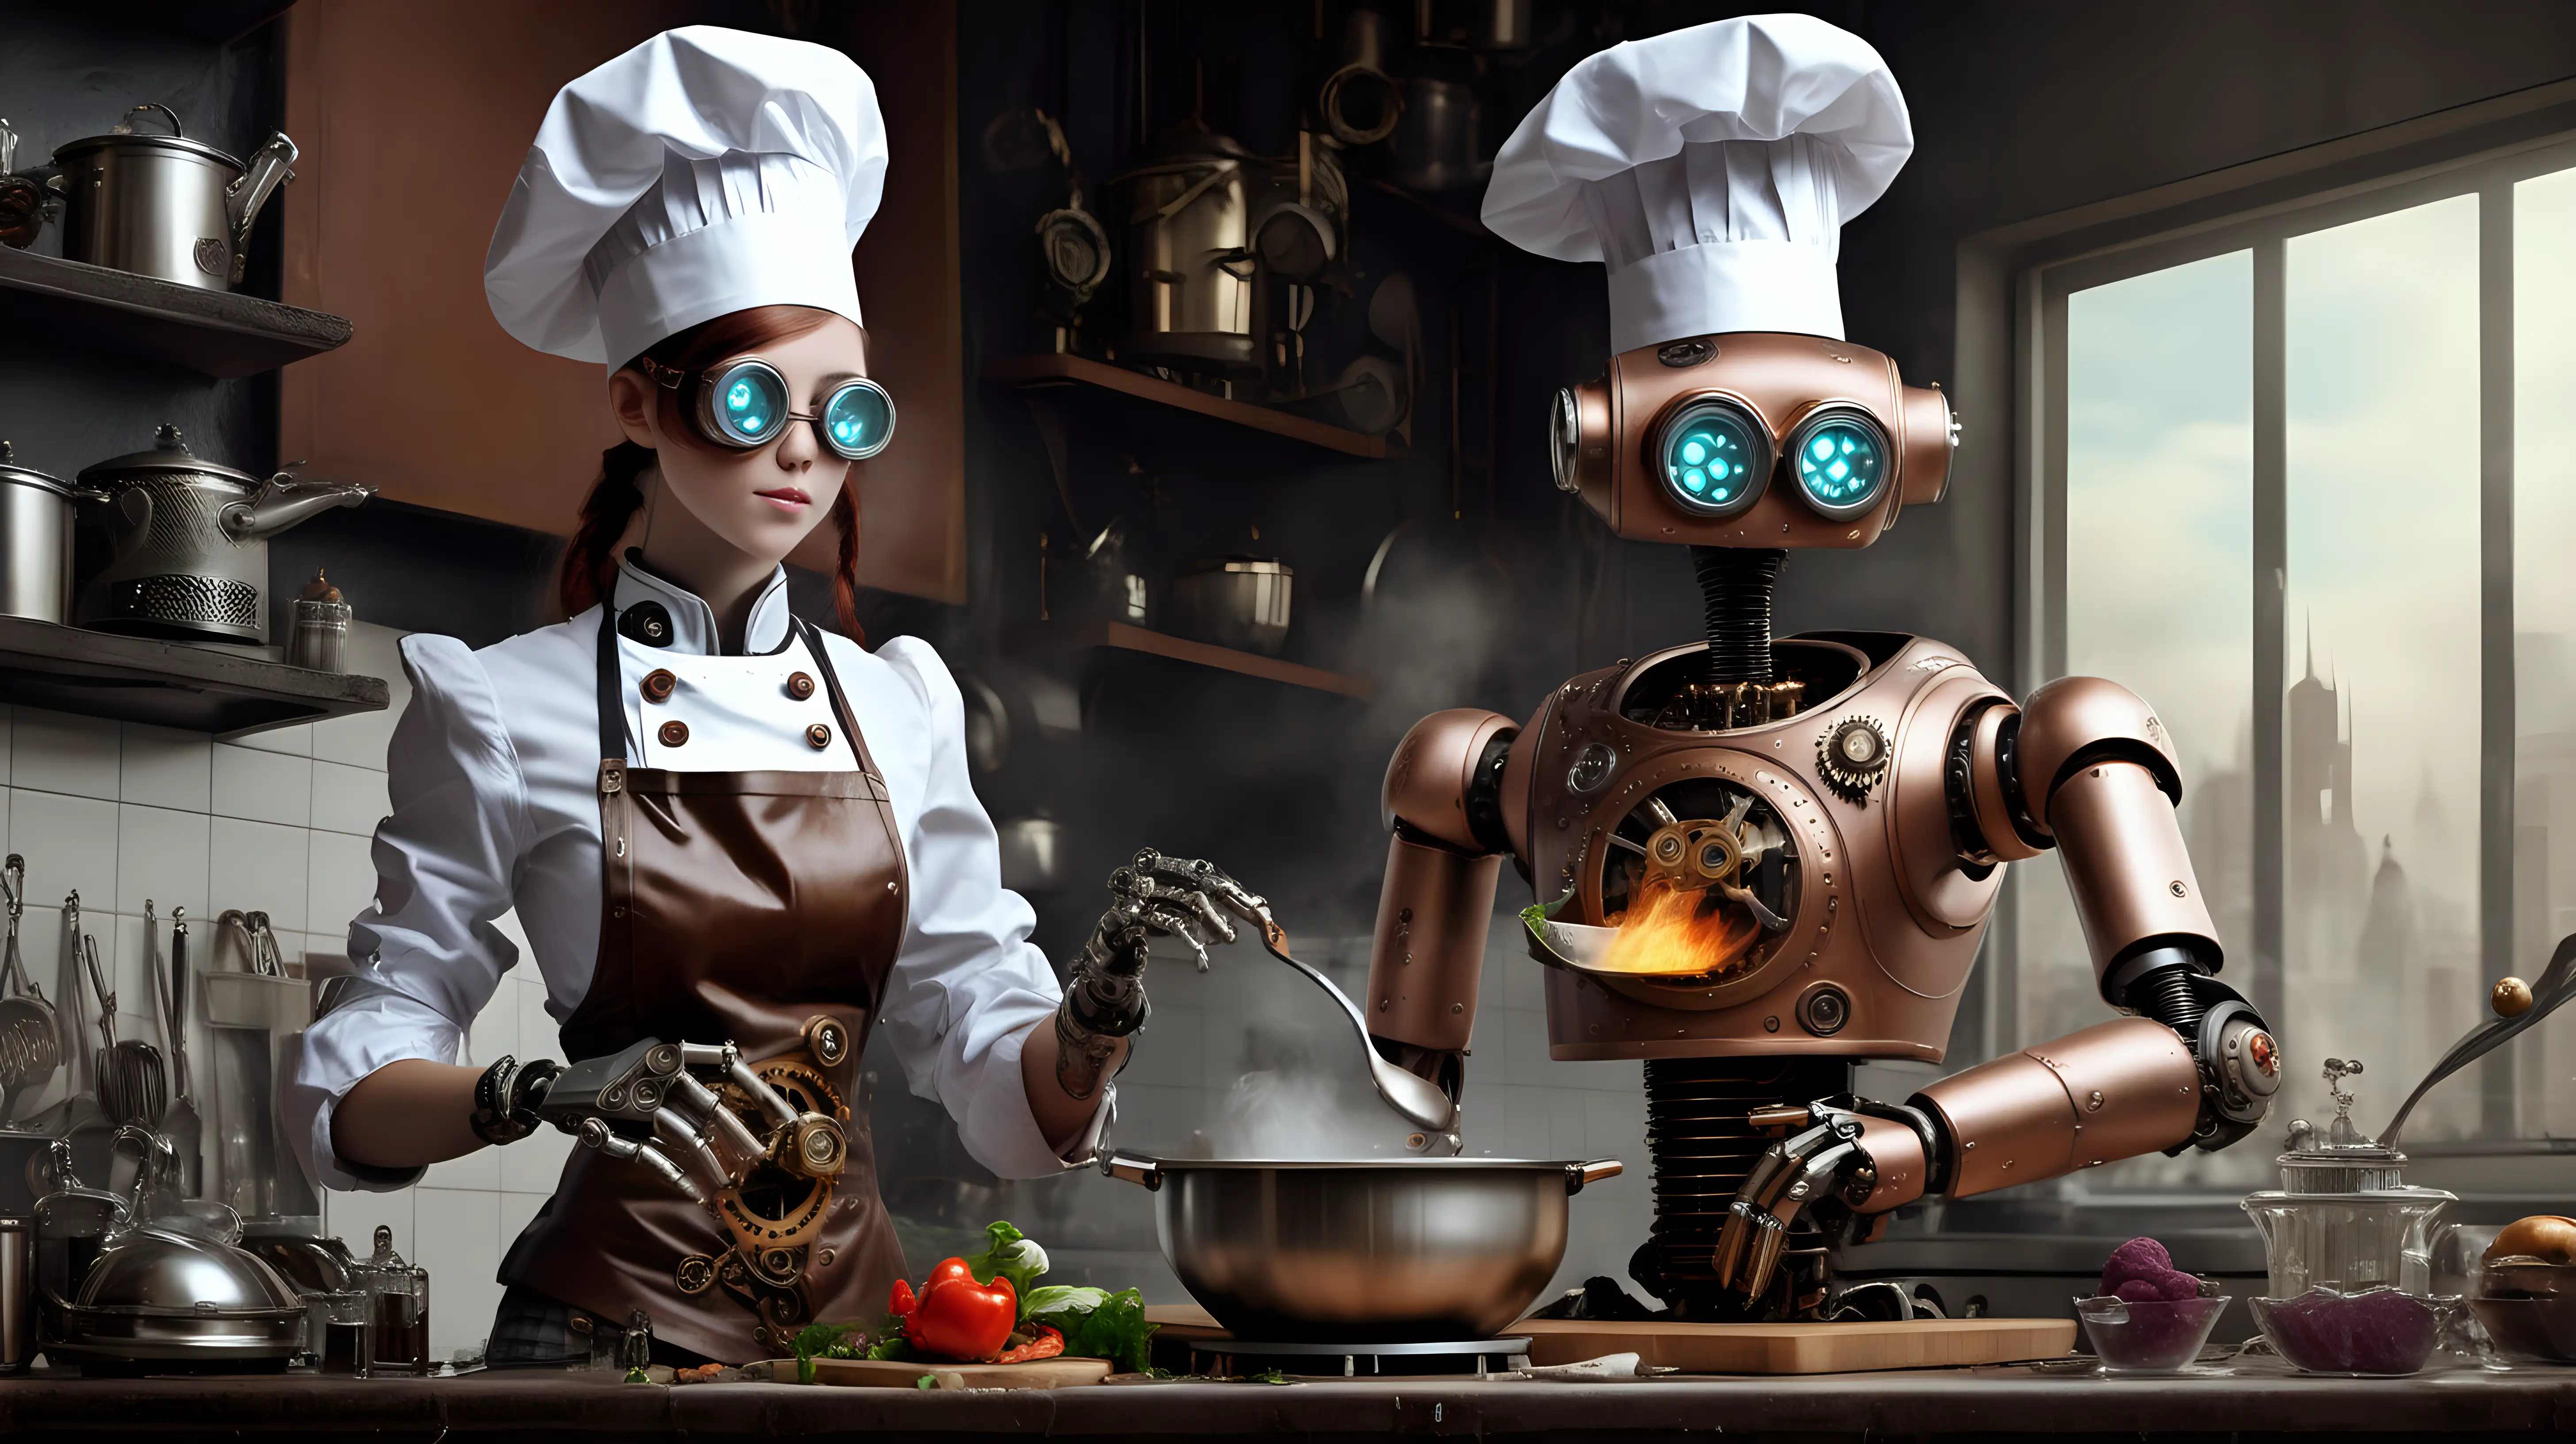 Steampunk Robot Chef in a Whimsical Kitchen with a Curious Girl